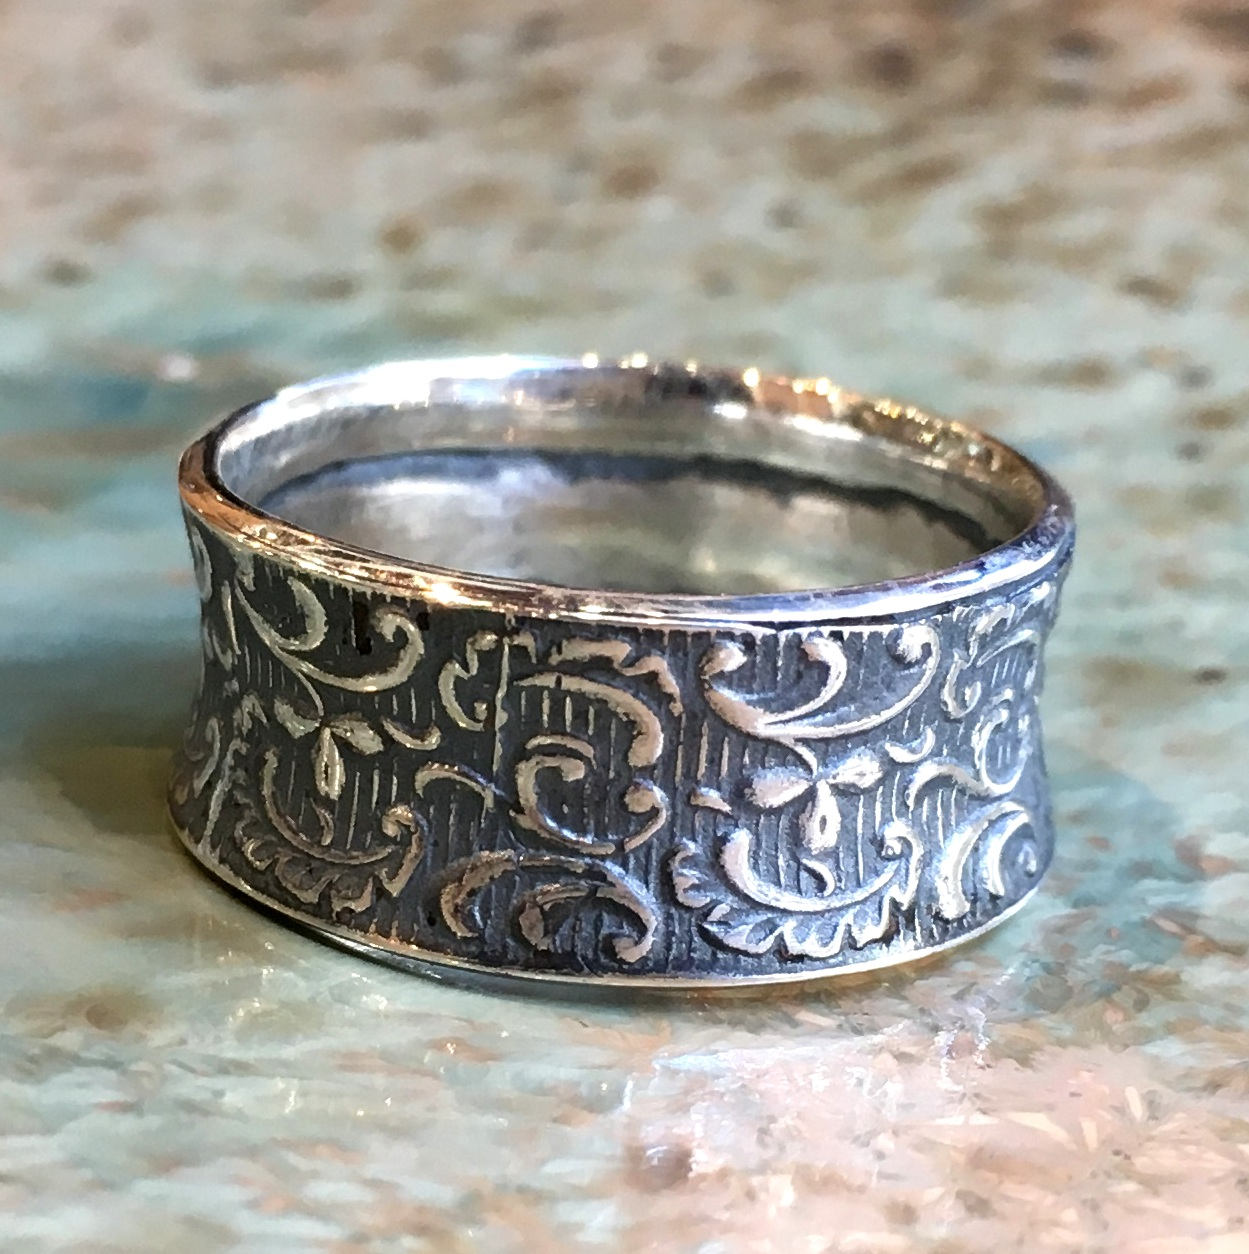 Sterling silver band, wide band, oxidized band, wedding ring, unisex ring, vine ring, filigree ring, oxidized silver - Simple life R2532